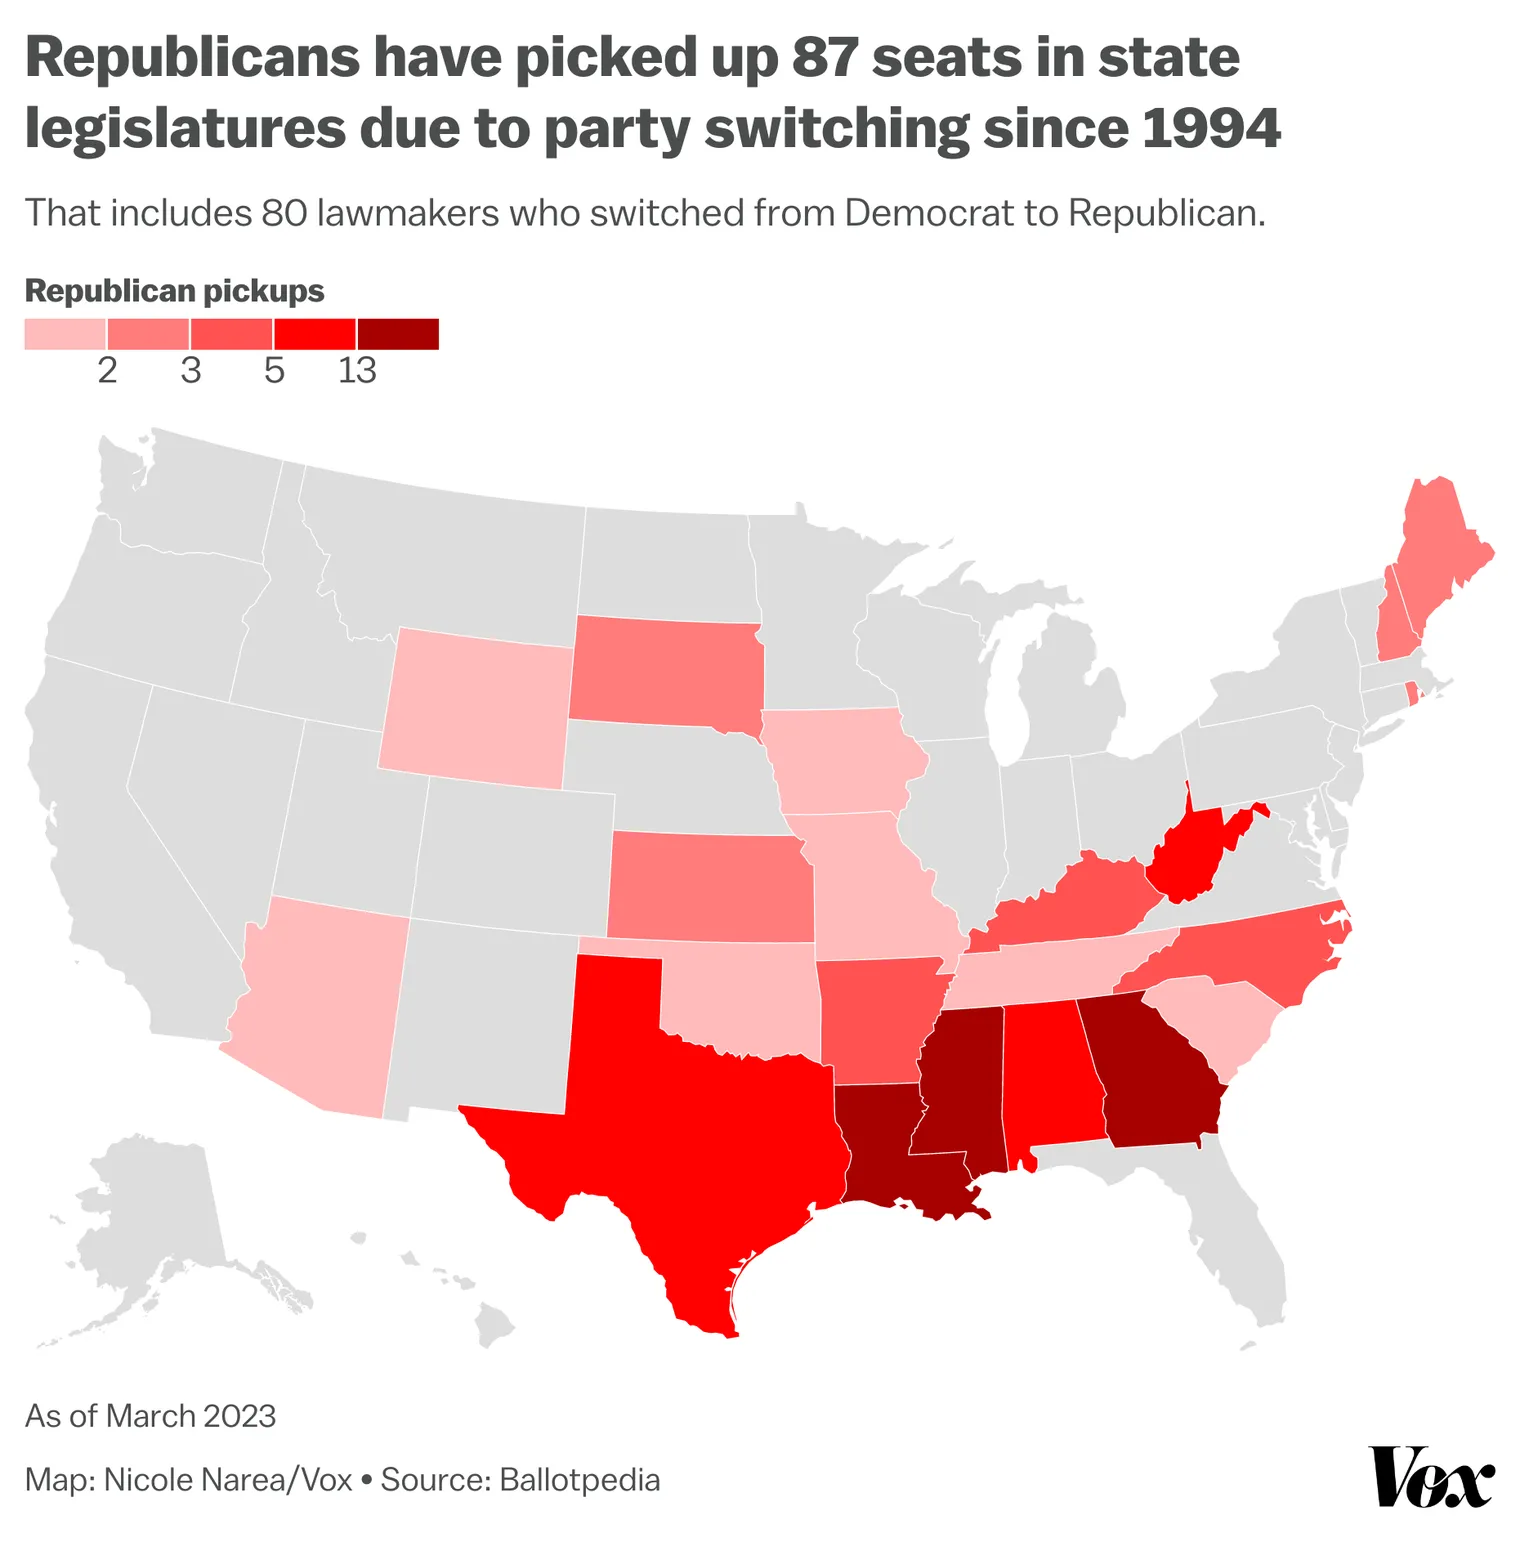 CvoUi_republicans_have_picked_up_87_seats_in_state_legislatures_due_to_party_switching_since_1994.png